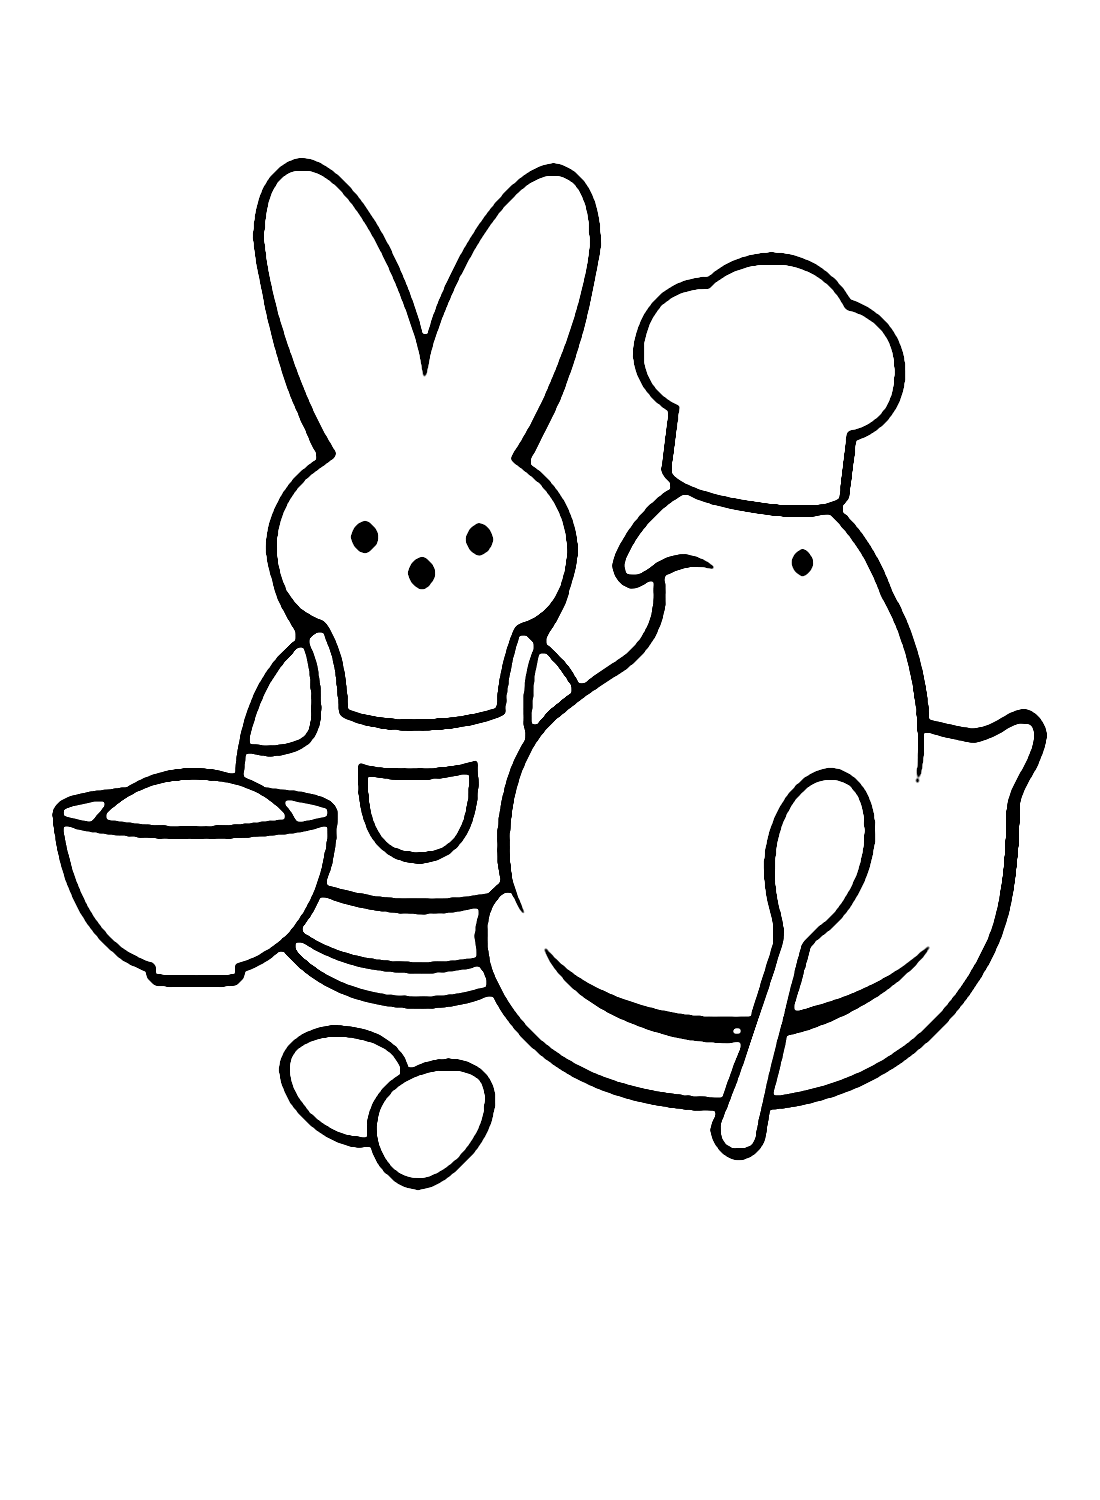 Peeps Cooking Coloring Page